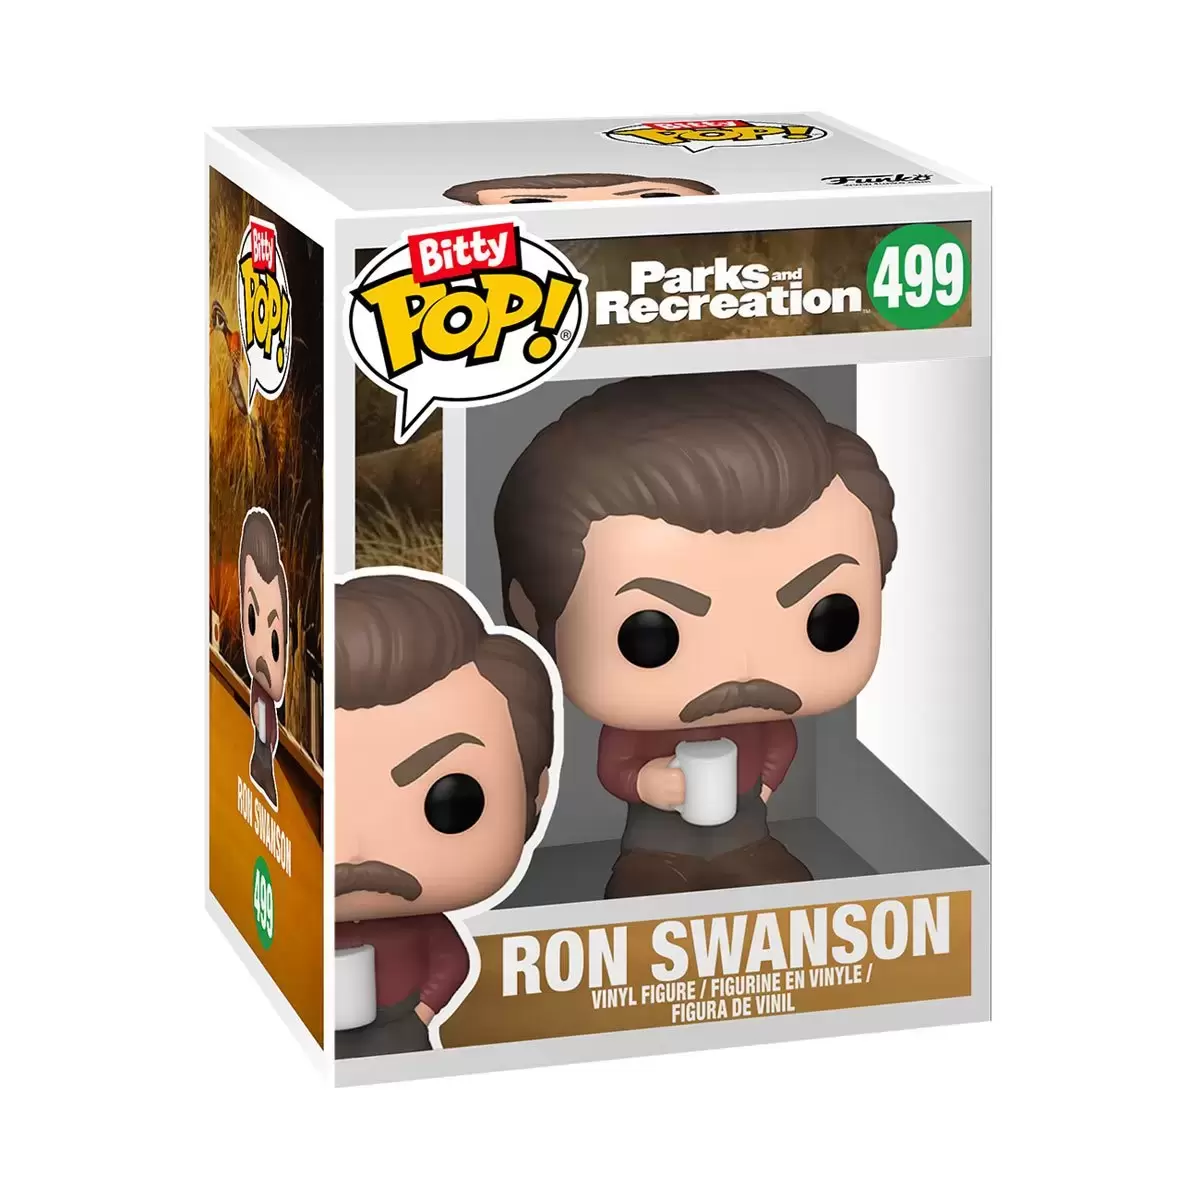 Bitty POP! - Parks And Recreation - Ron Swanson